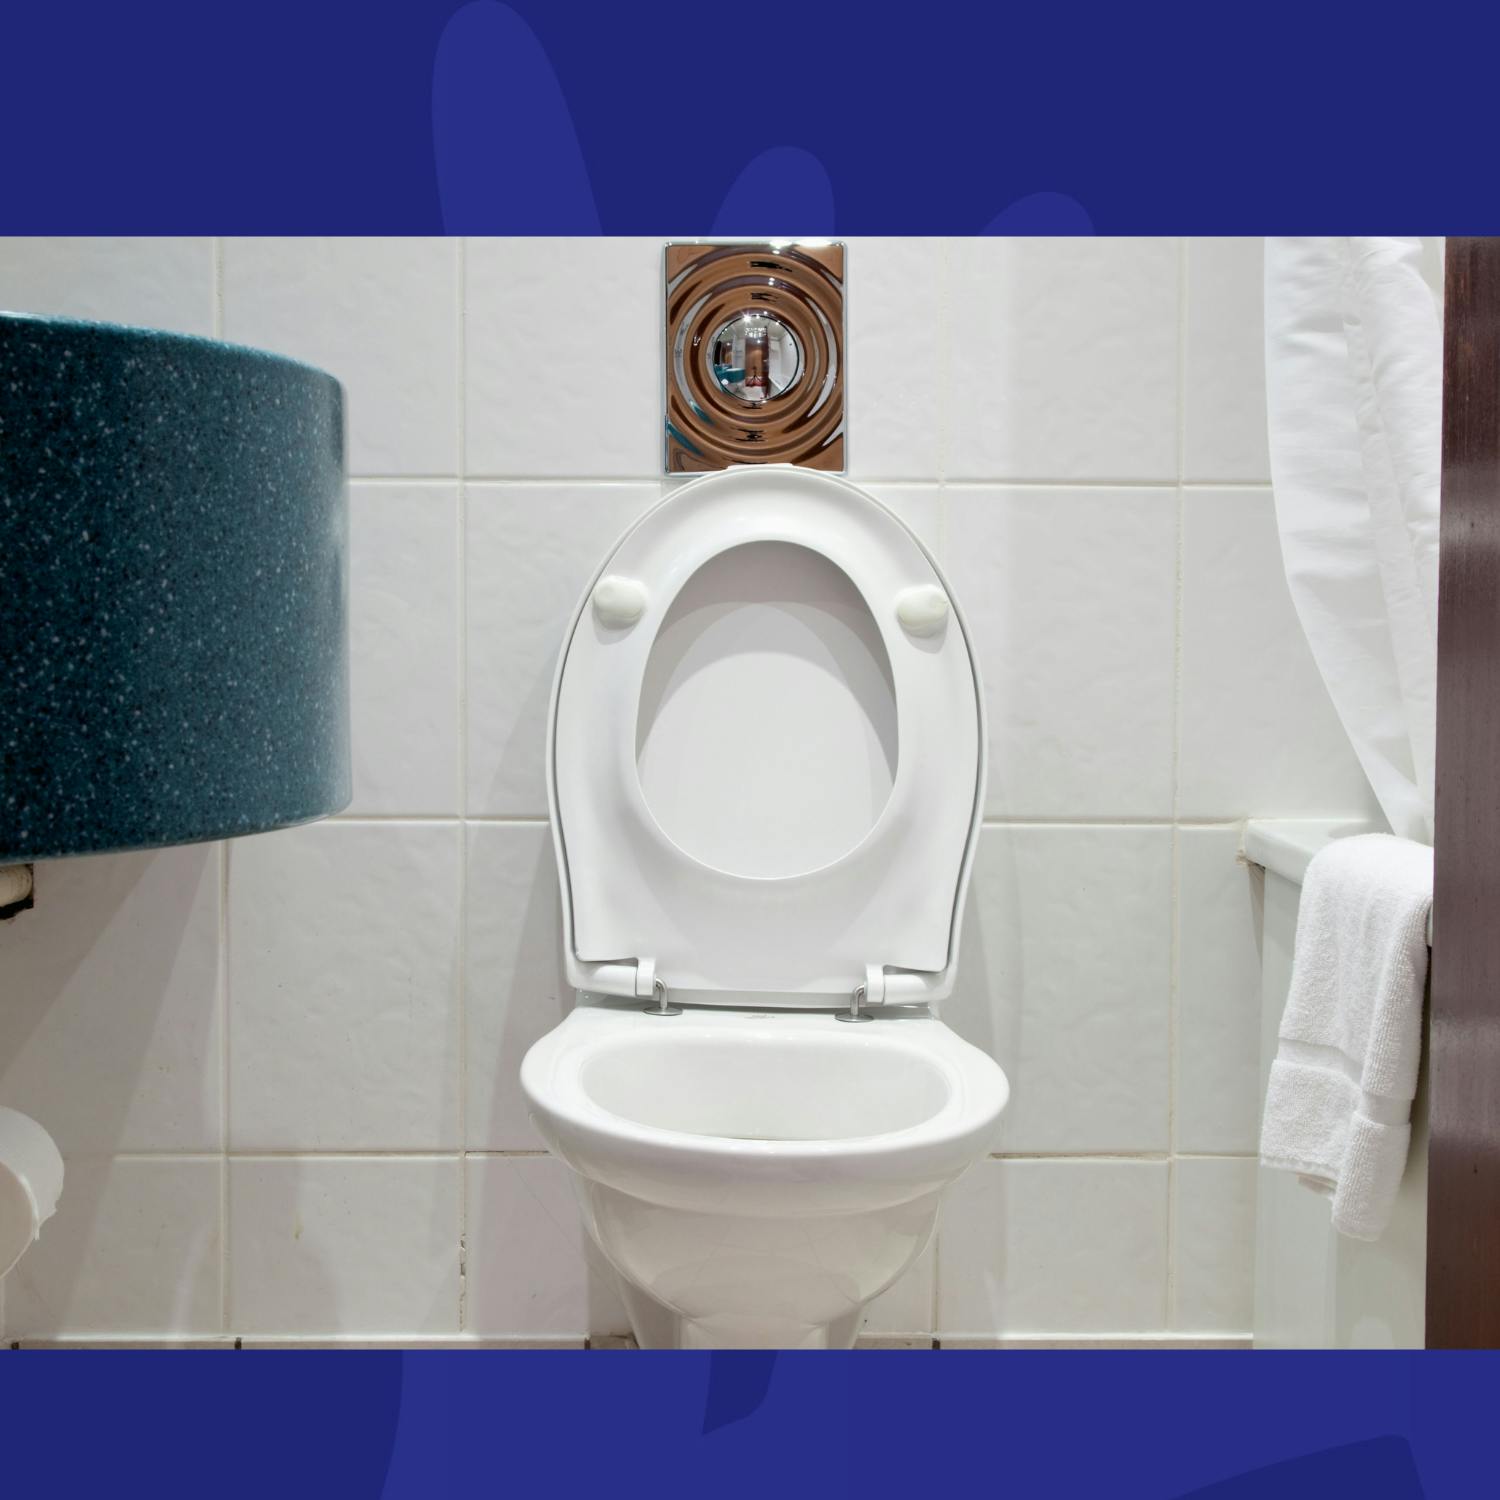 What Does It Sound Like When You Duet With A Toilet?